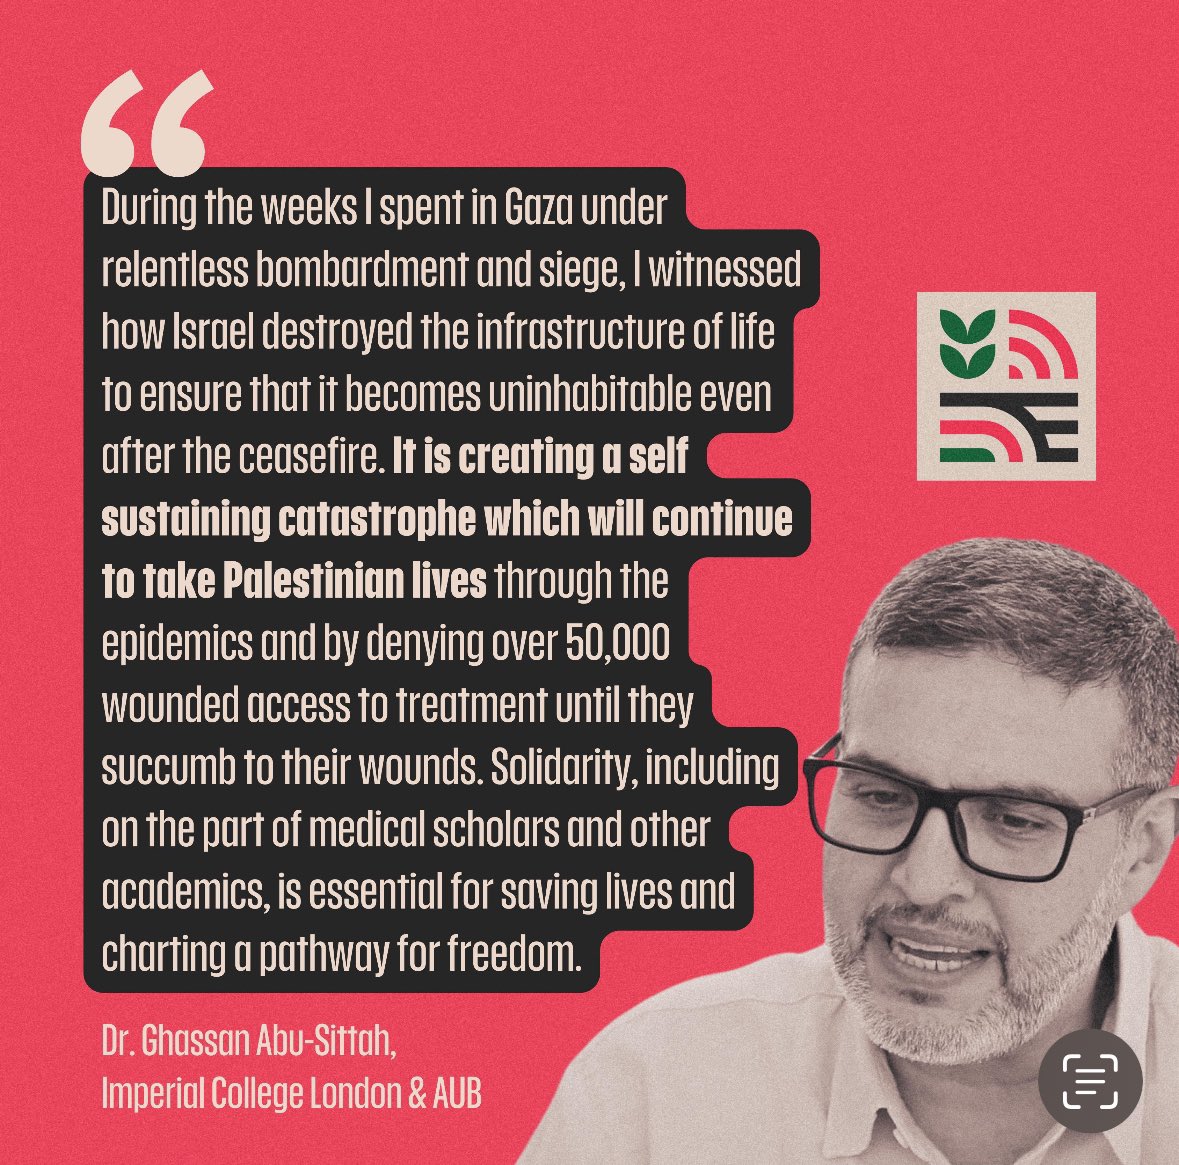 Scholars have an urgent responsibility to speak up as we witness a genocide in #Gaza. The courageous @GhassanAbuSitt1 calls on medical scholars & academics around the world for solidarity on the pathway to freedom. Sign @sawp ceasefire petition now scholarsagainstwar.org/statement/holi…